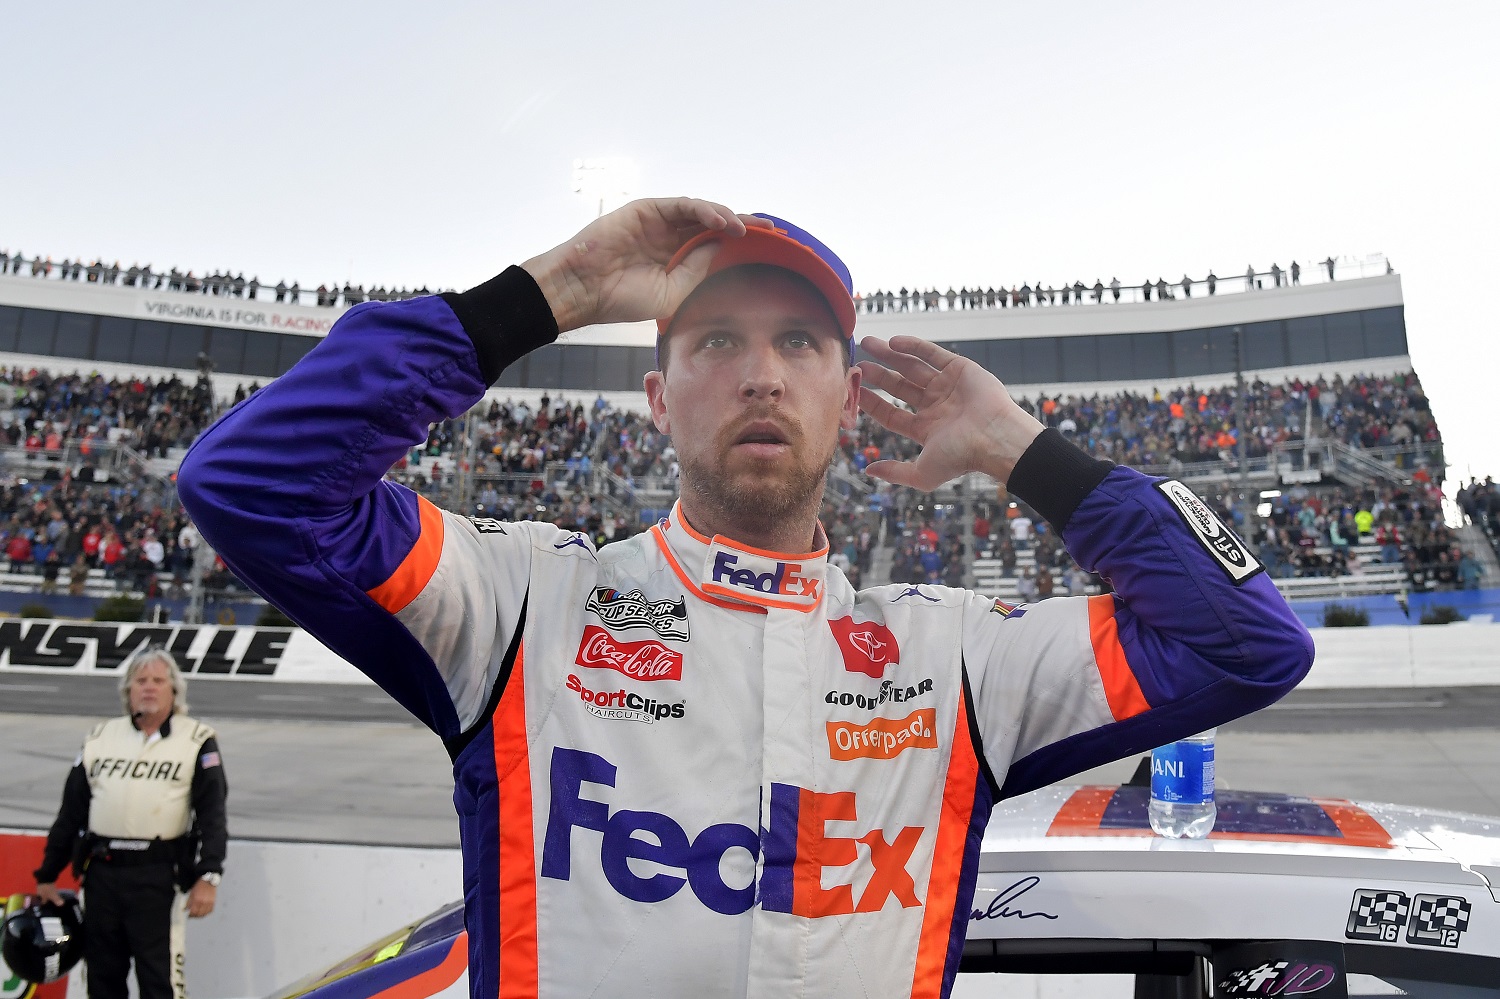 Denny Hamlin, driver of the No. 11 Toyota, reacts after the NASCAR Cup Series Xfinity 500 at Martinsville Speedway on Oct. 31, 2021.